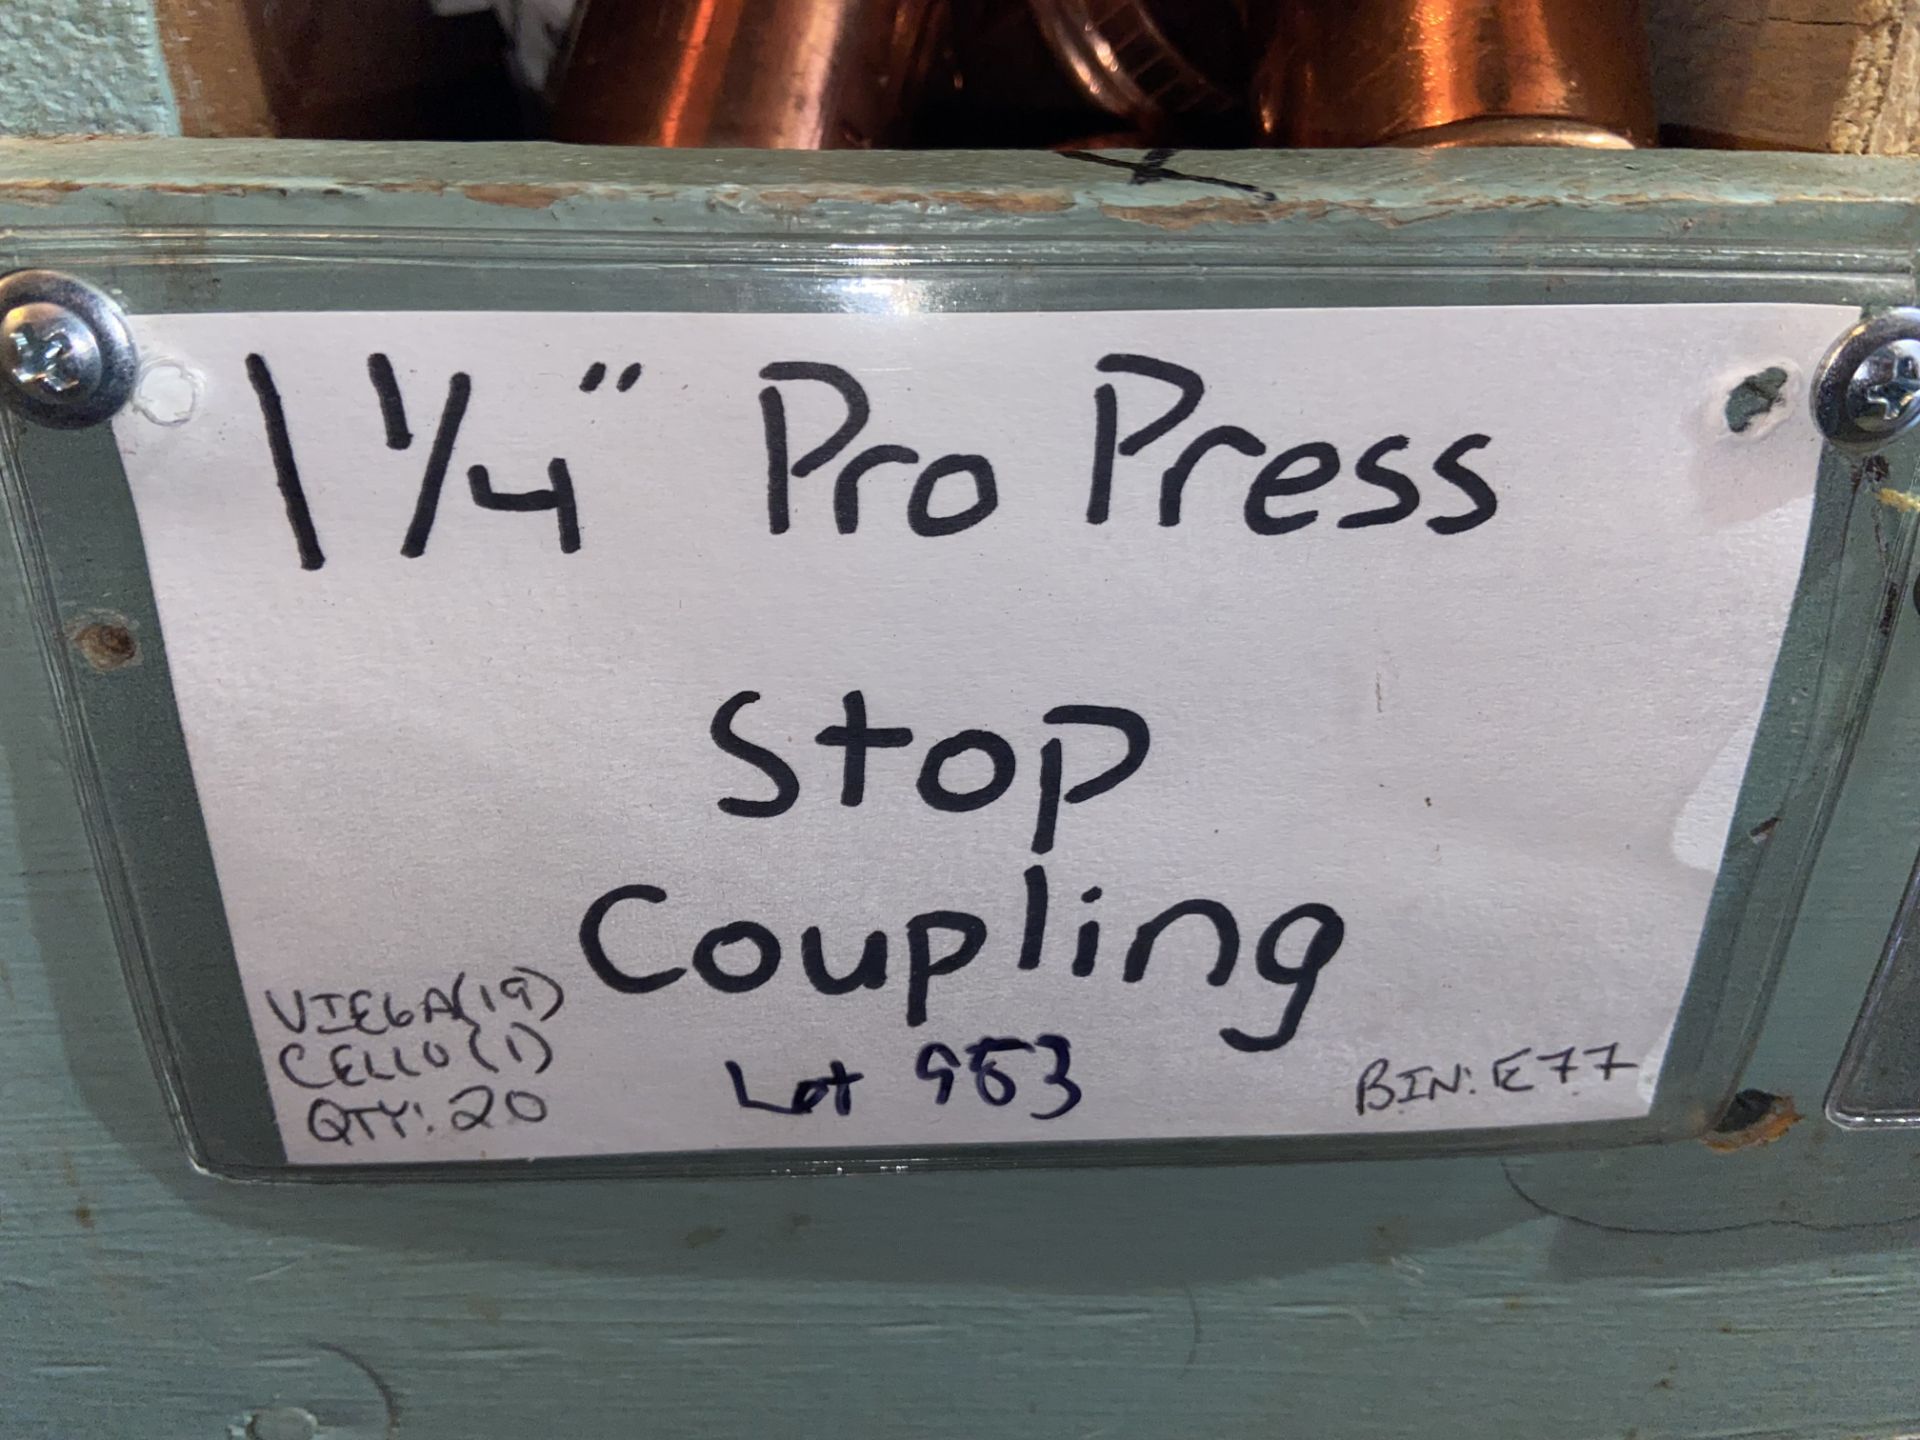 VIEGA (19) 1 1/4” pro press stop coupling CELLO (1) (LOCATED IN MONROEVILLE, PA) - Image 2 of 4